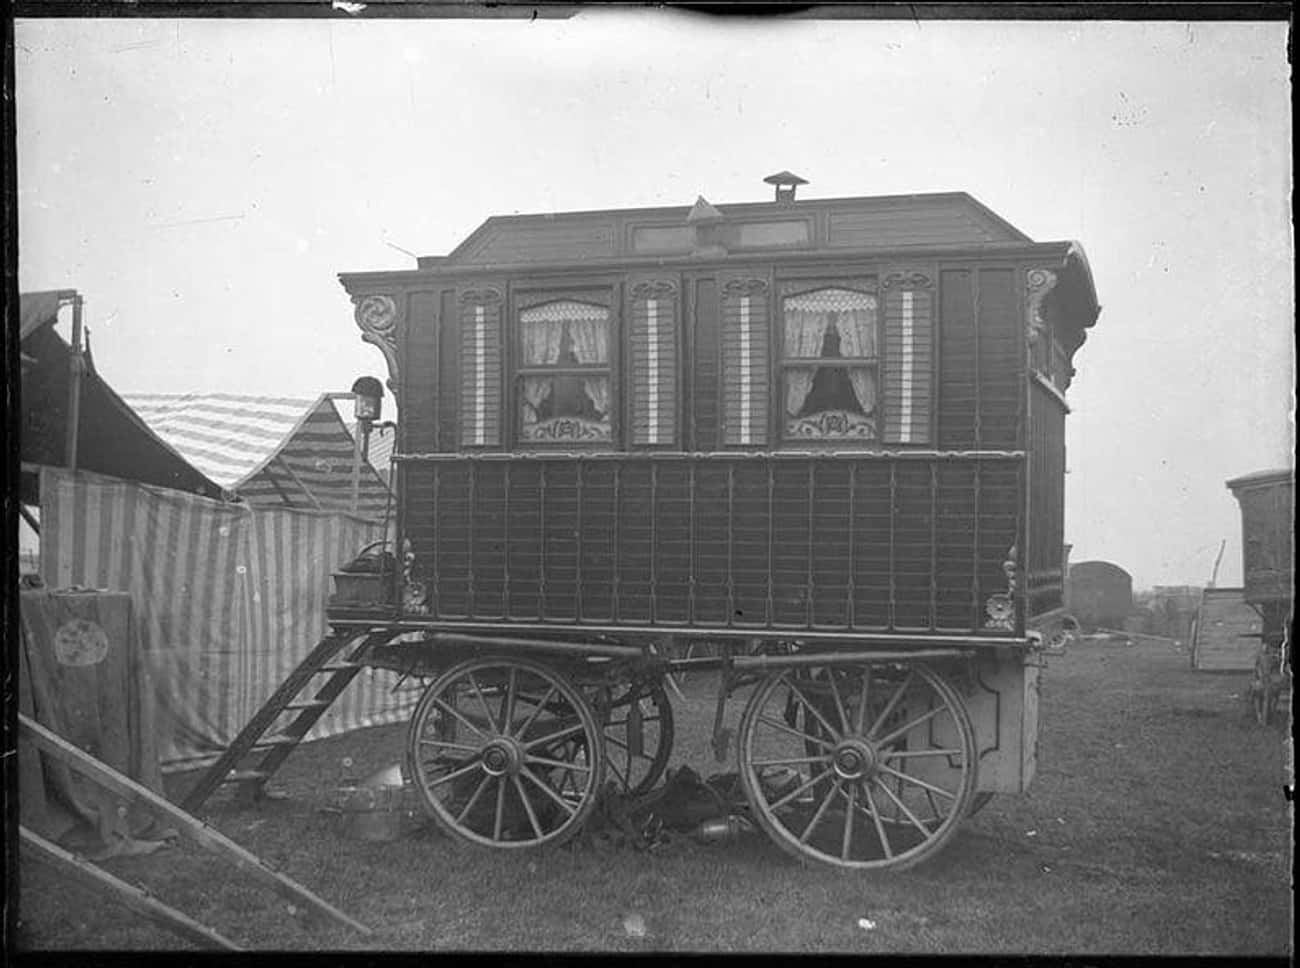 The Wagon Where 35% of the Missing Children Ended Up in the Early 20th Century